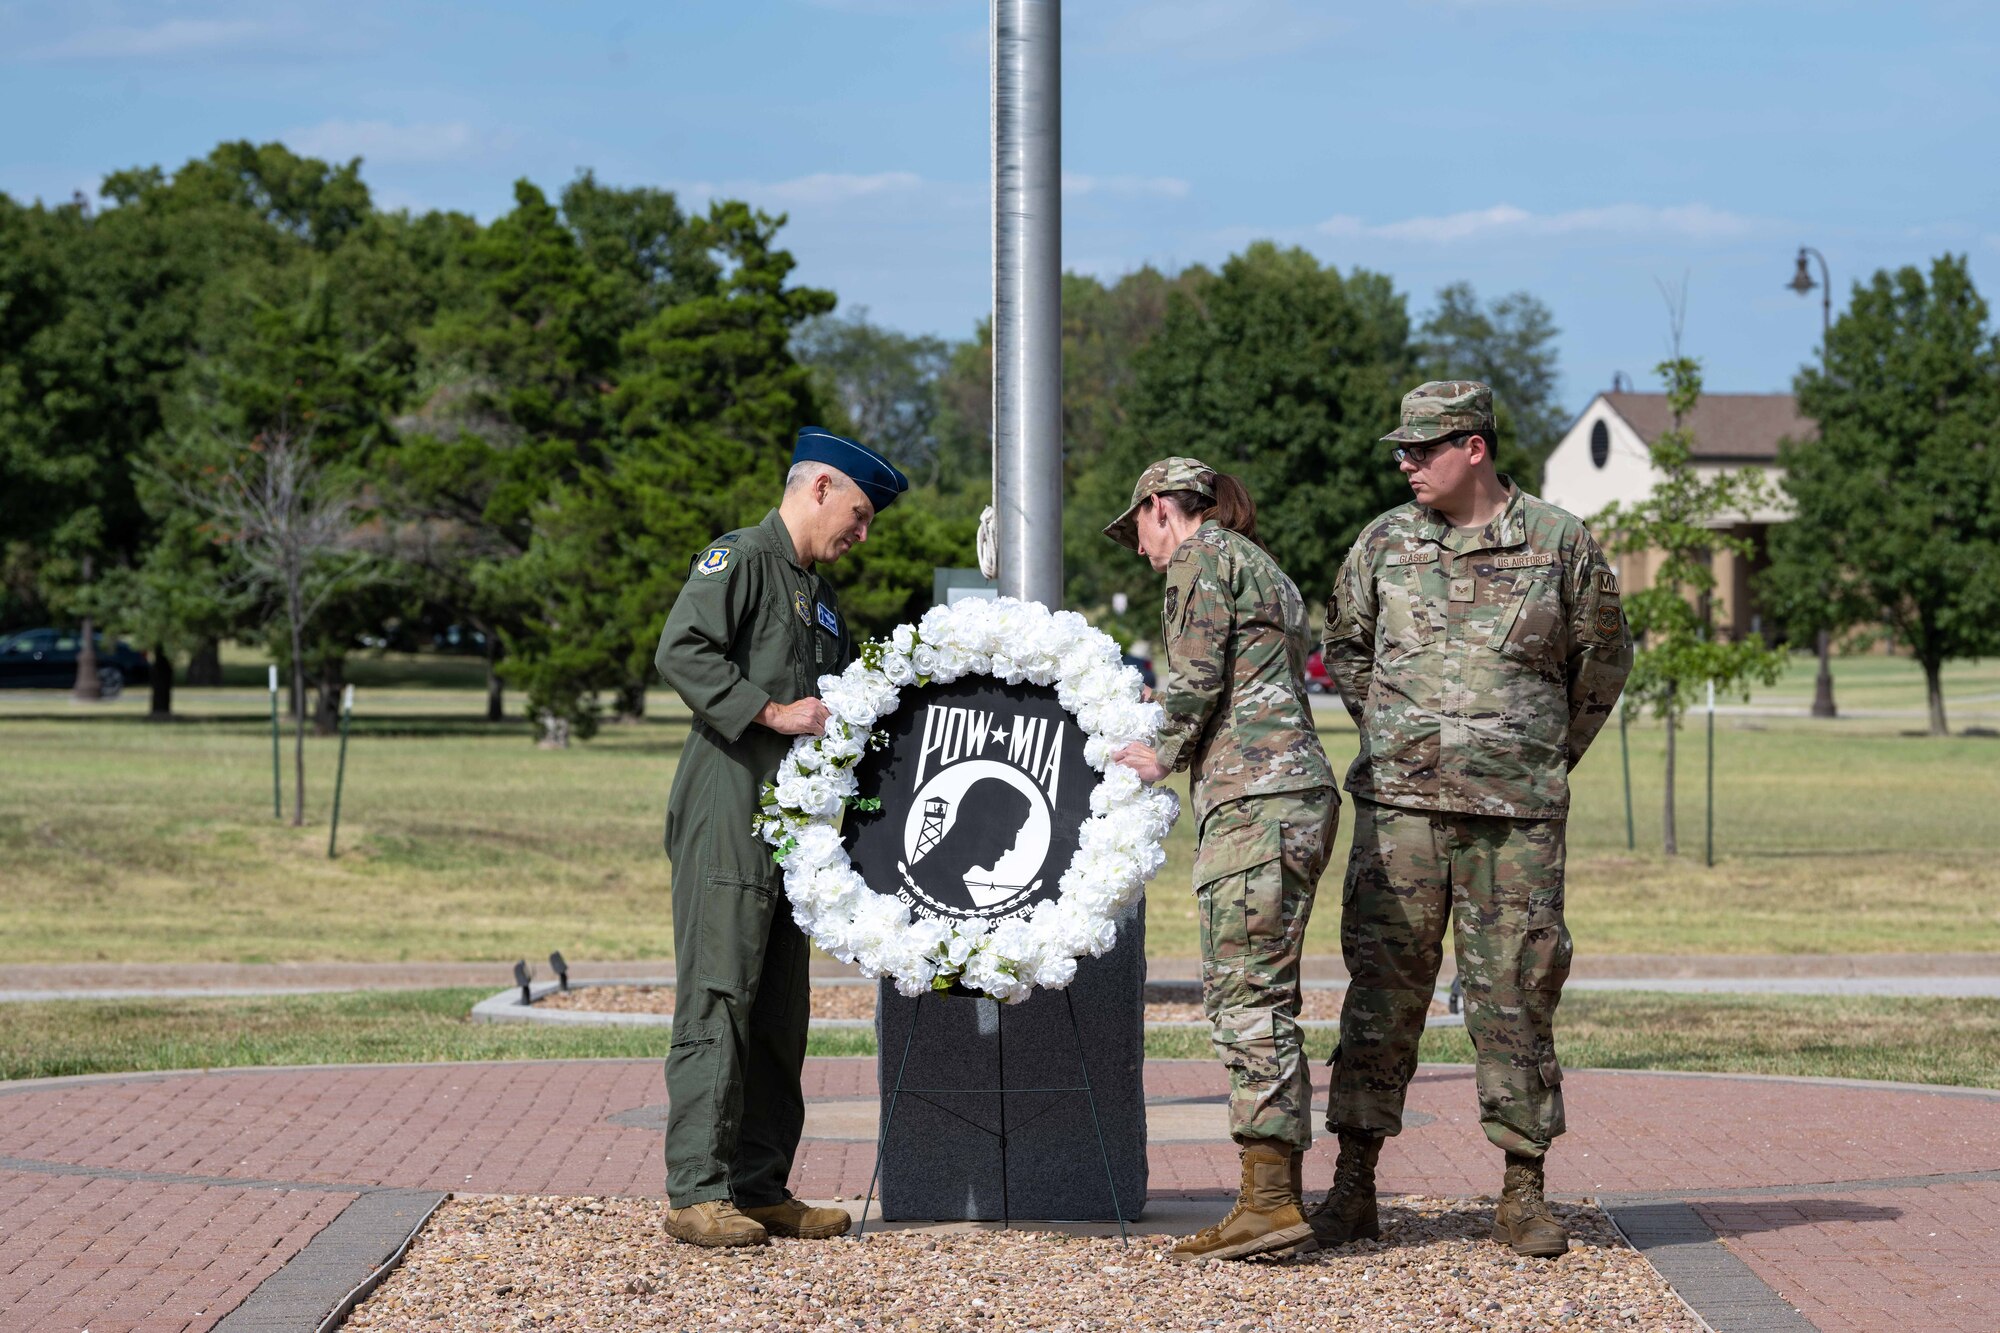 Col. Jacob Thornburg, 22nd Air Refueling Wing deputy commander, and Chief Master Sgt. Laura Hoover, 22nd ARW command chief, lay a wreath outside the wing headquarters building Sept. 13, 2023, at McConnell Air Force Base, Kansas. The Wreath-Laying Ceremony honors the legacy of fallen heroes who were prisoners of war or missing in action. (U.S. Air Force photo by Airman 1st Class William Lunn)